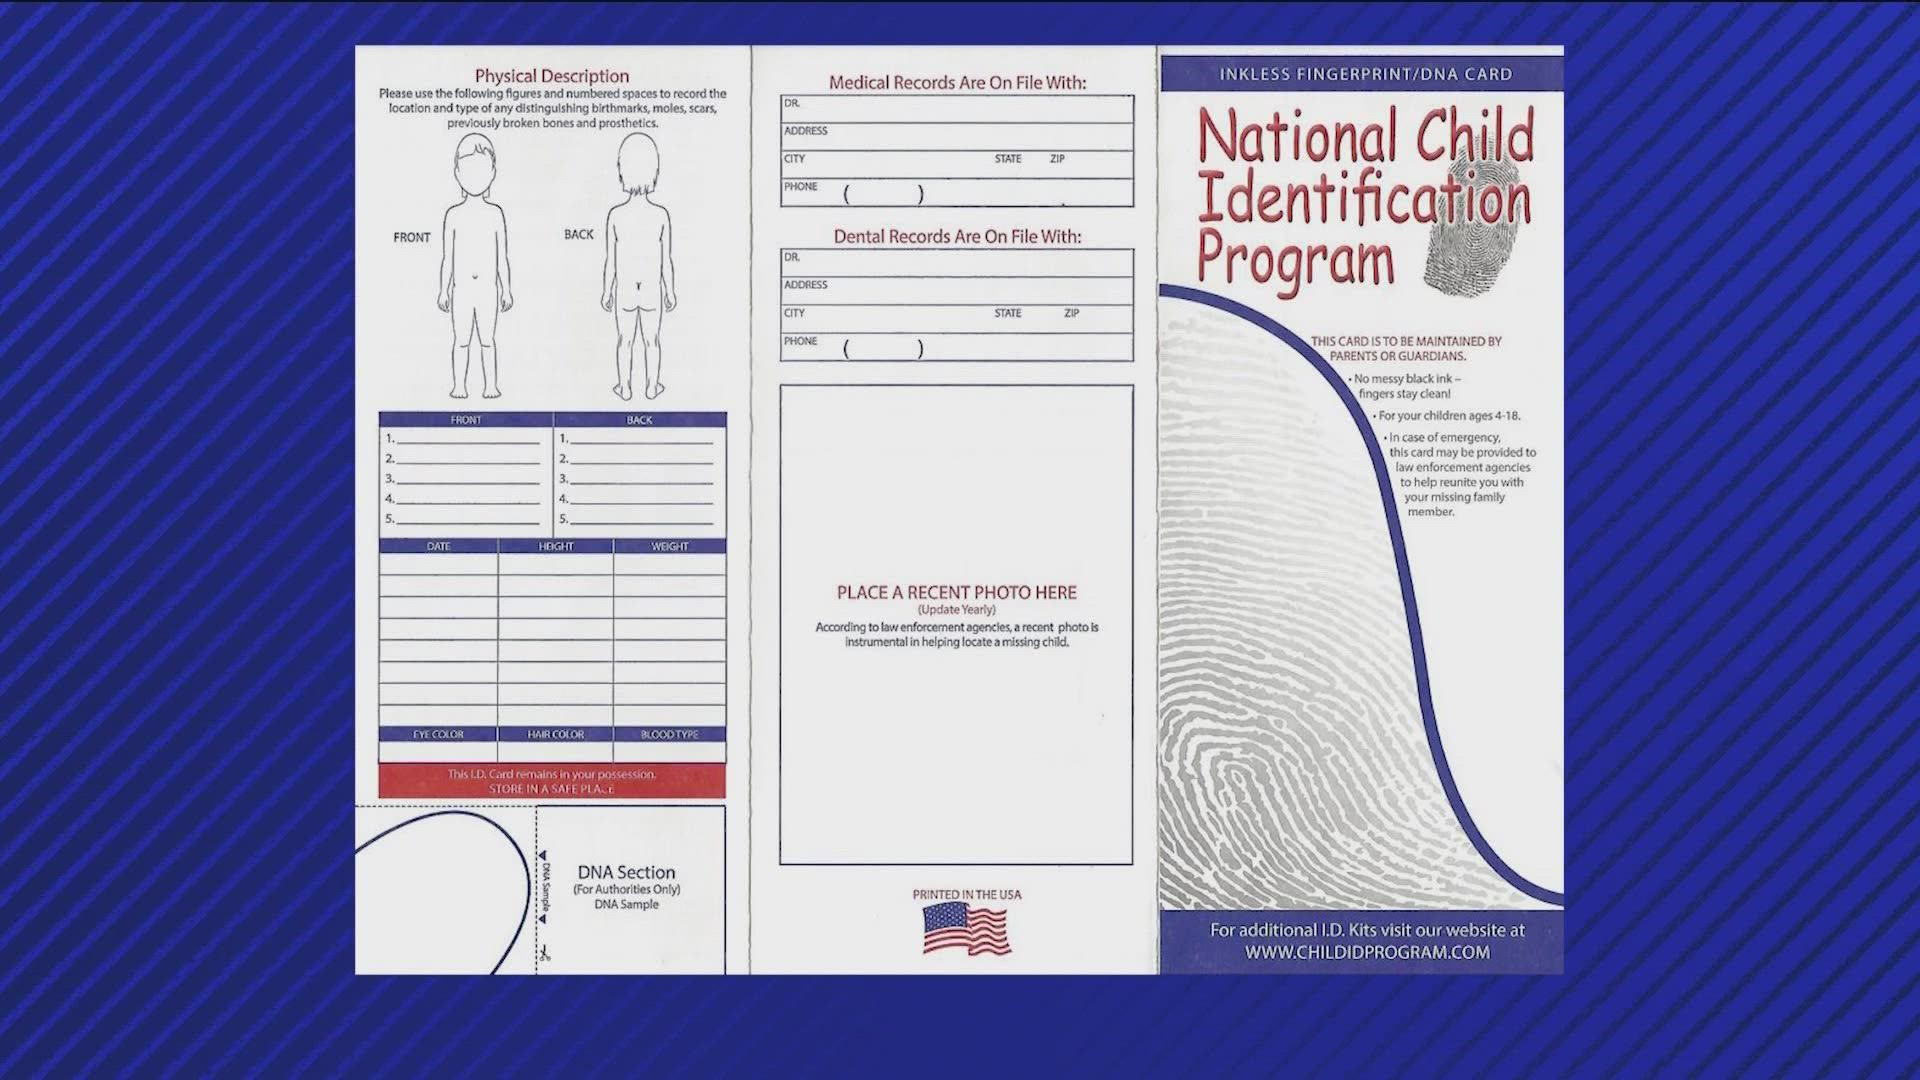 Students across Texas are now being given child ID DNA kids, meant to help identify children in an emergency.